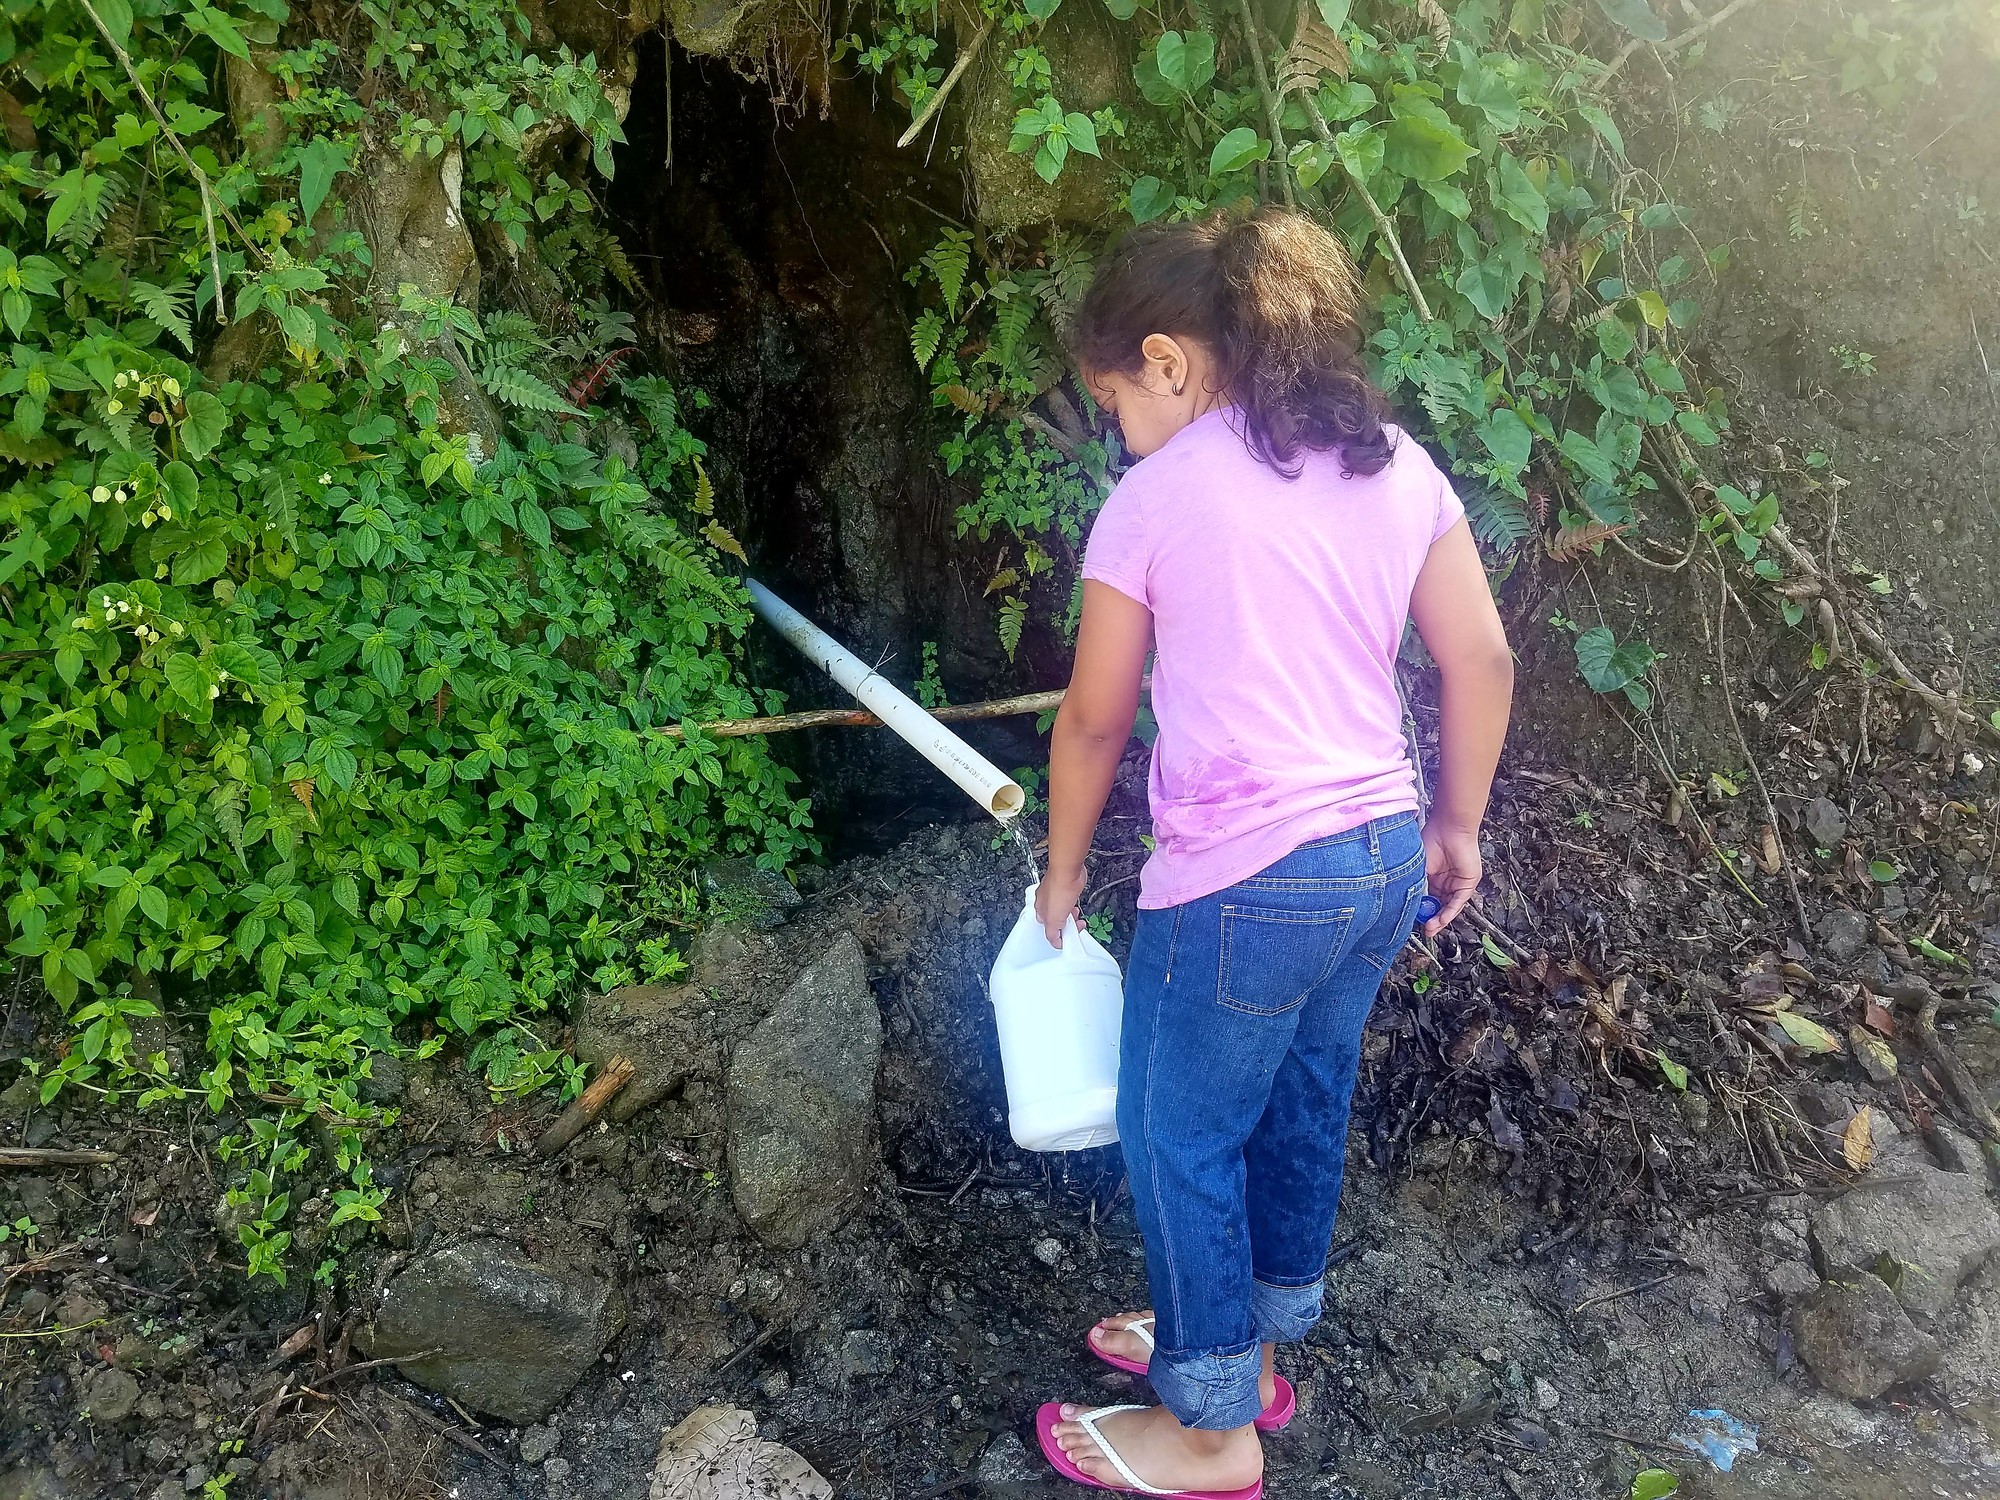 A young girl in a pink shirt, jeans, and sandals fills up water using a reused plastic jug from a roadside water source in Adjuntas, Puerto Rico